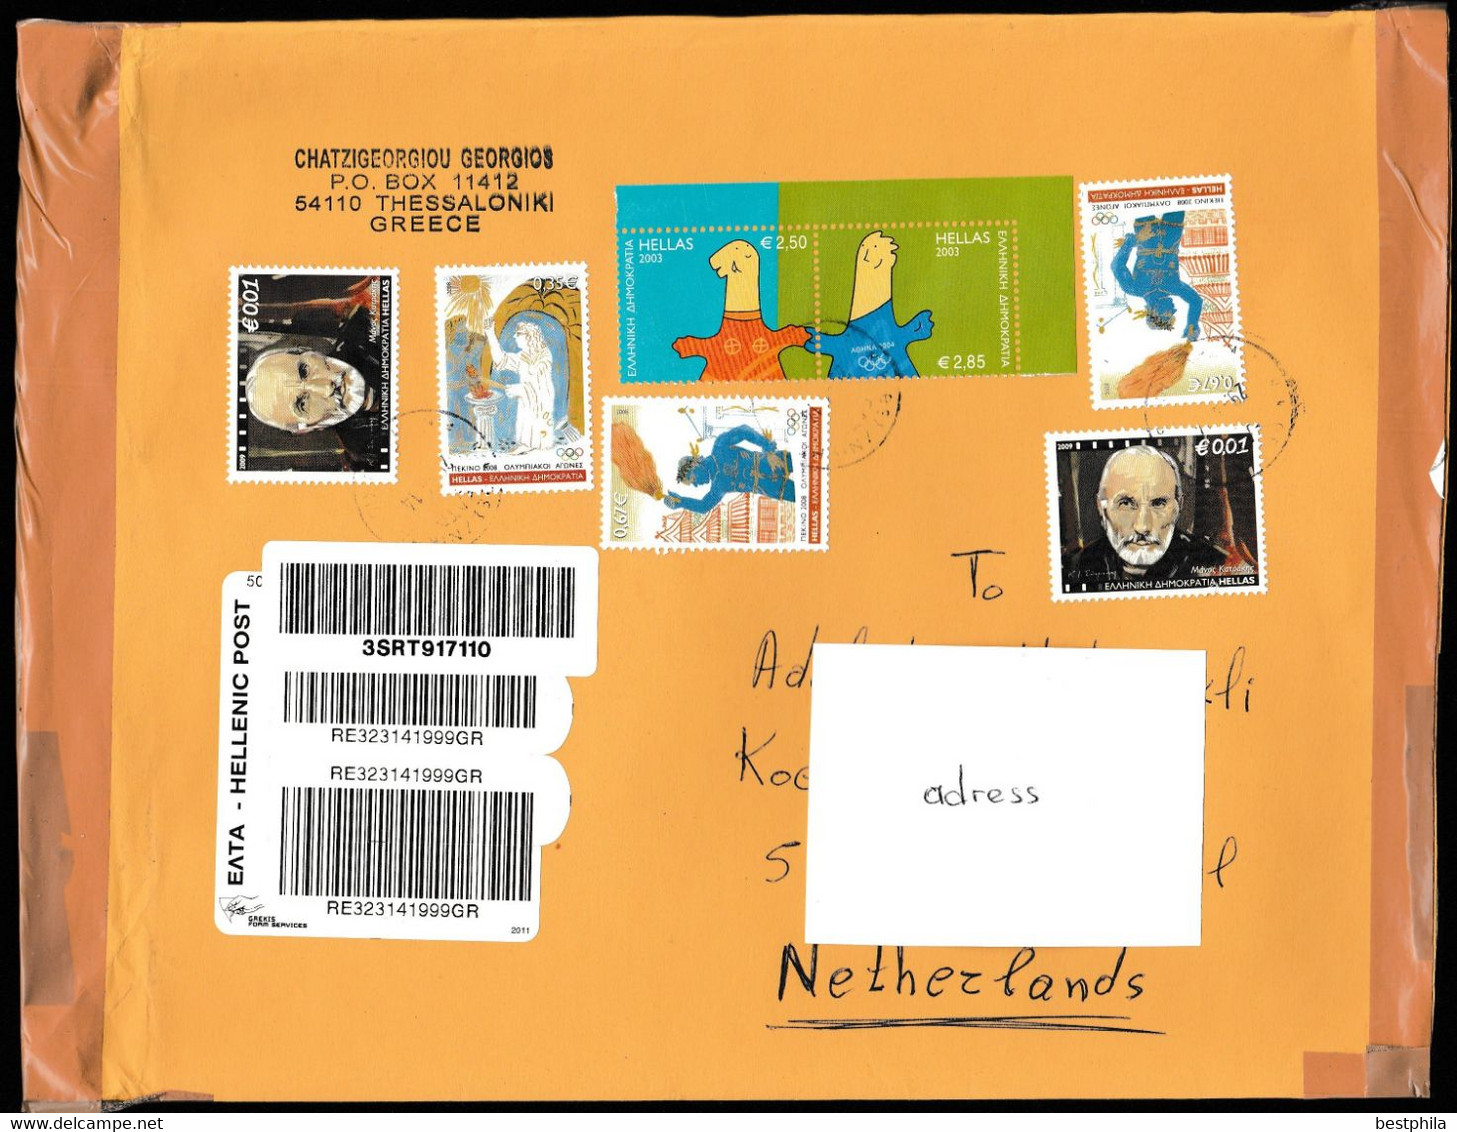 Greece, Griekenland - Postal History & Philatelic Cover With Registered Letter - 132 - Covers & Documents